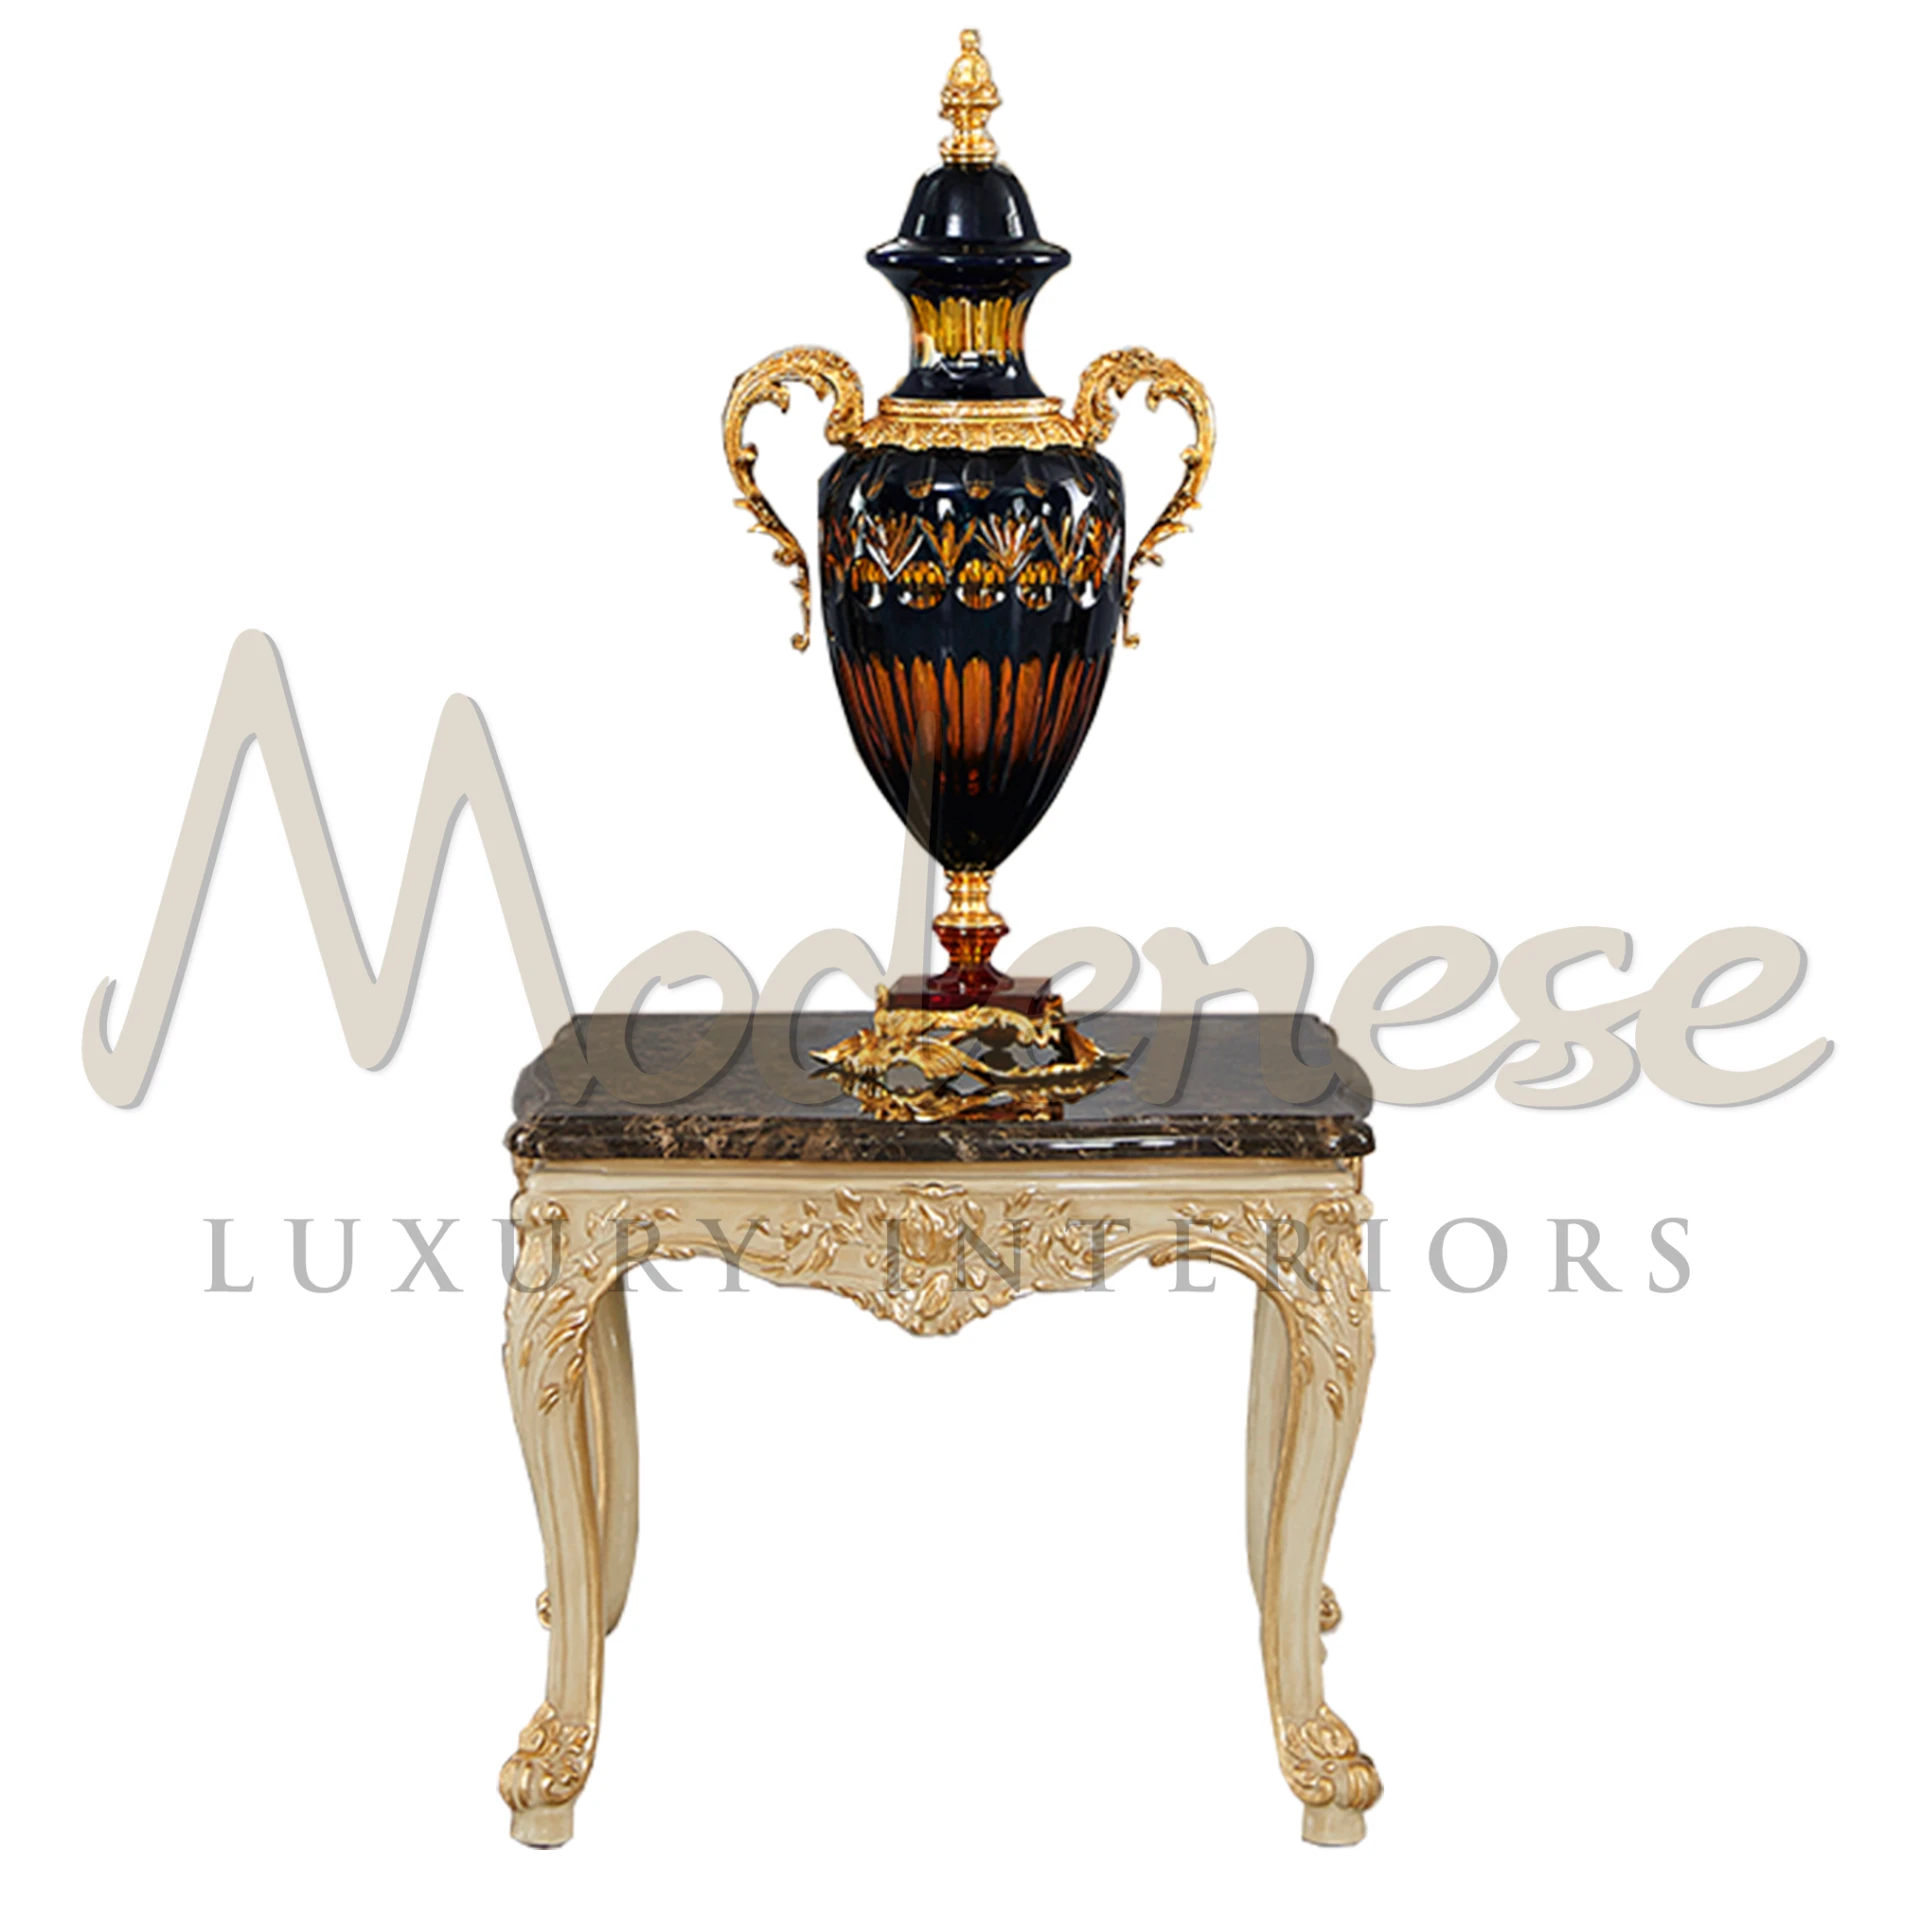 Luxurious Emperador Classy Side Table with Dark marble top and gold leaf details, a masterpiece by Modenese Furniture.